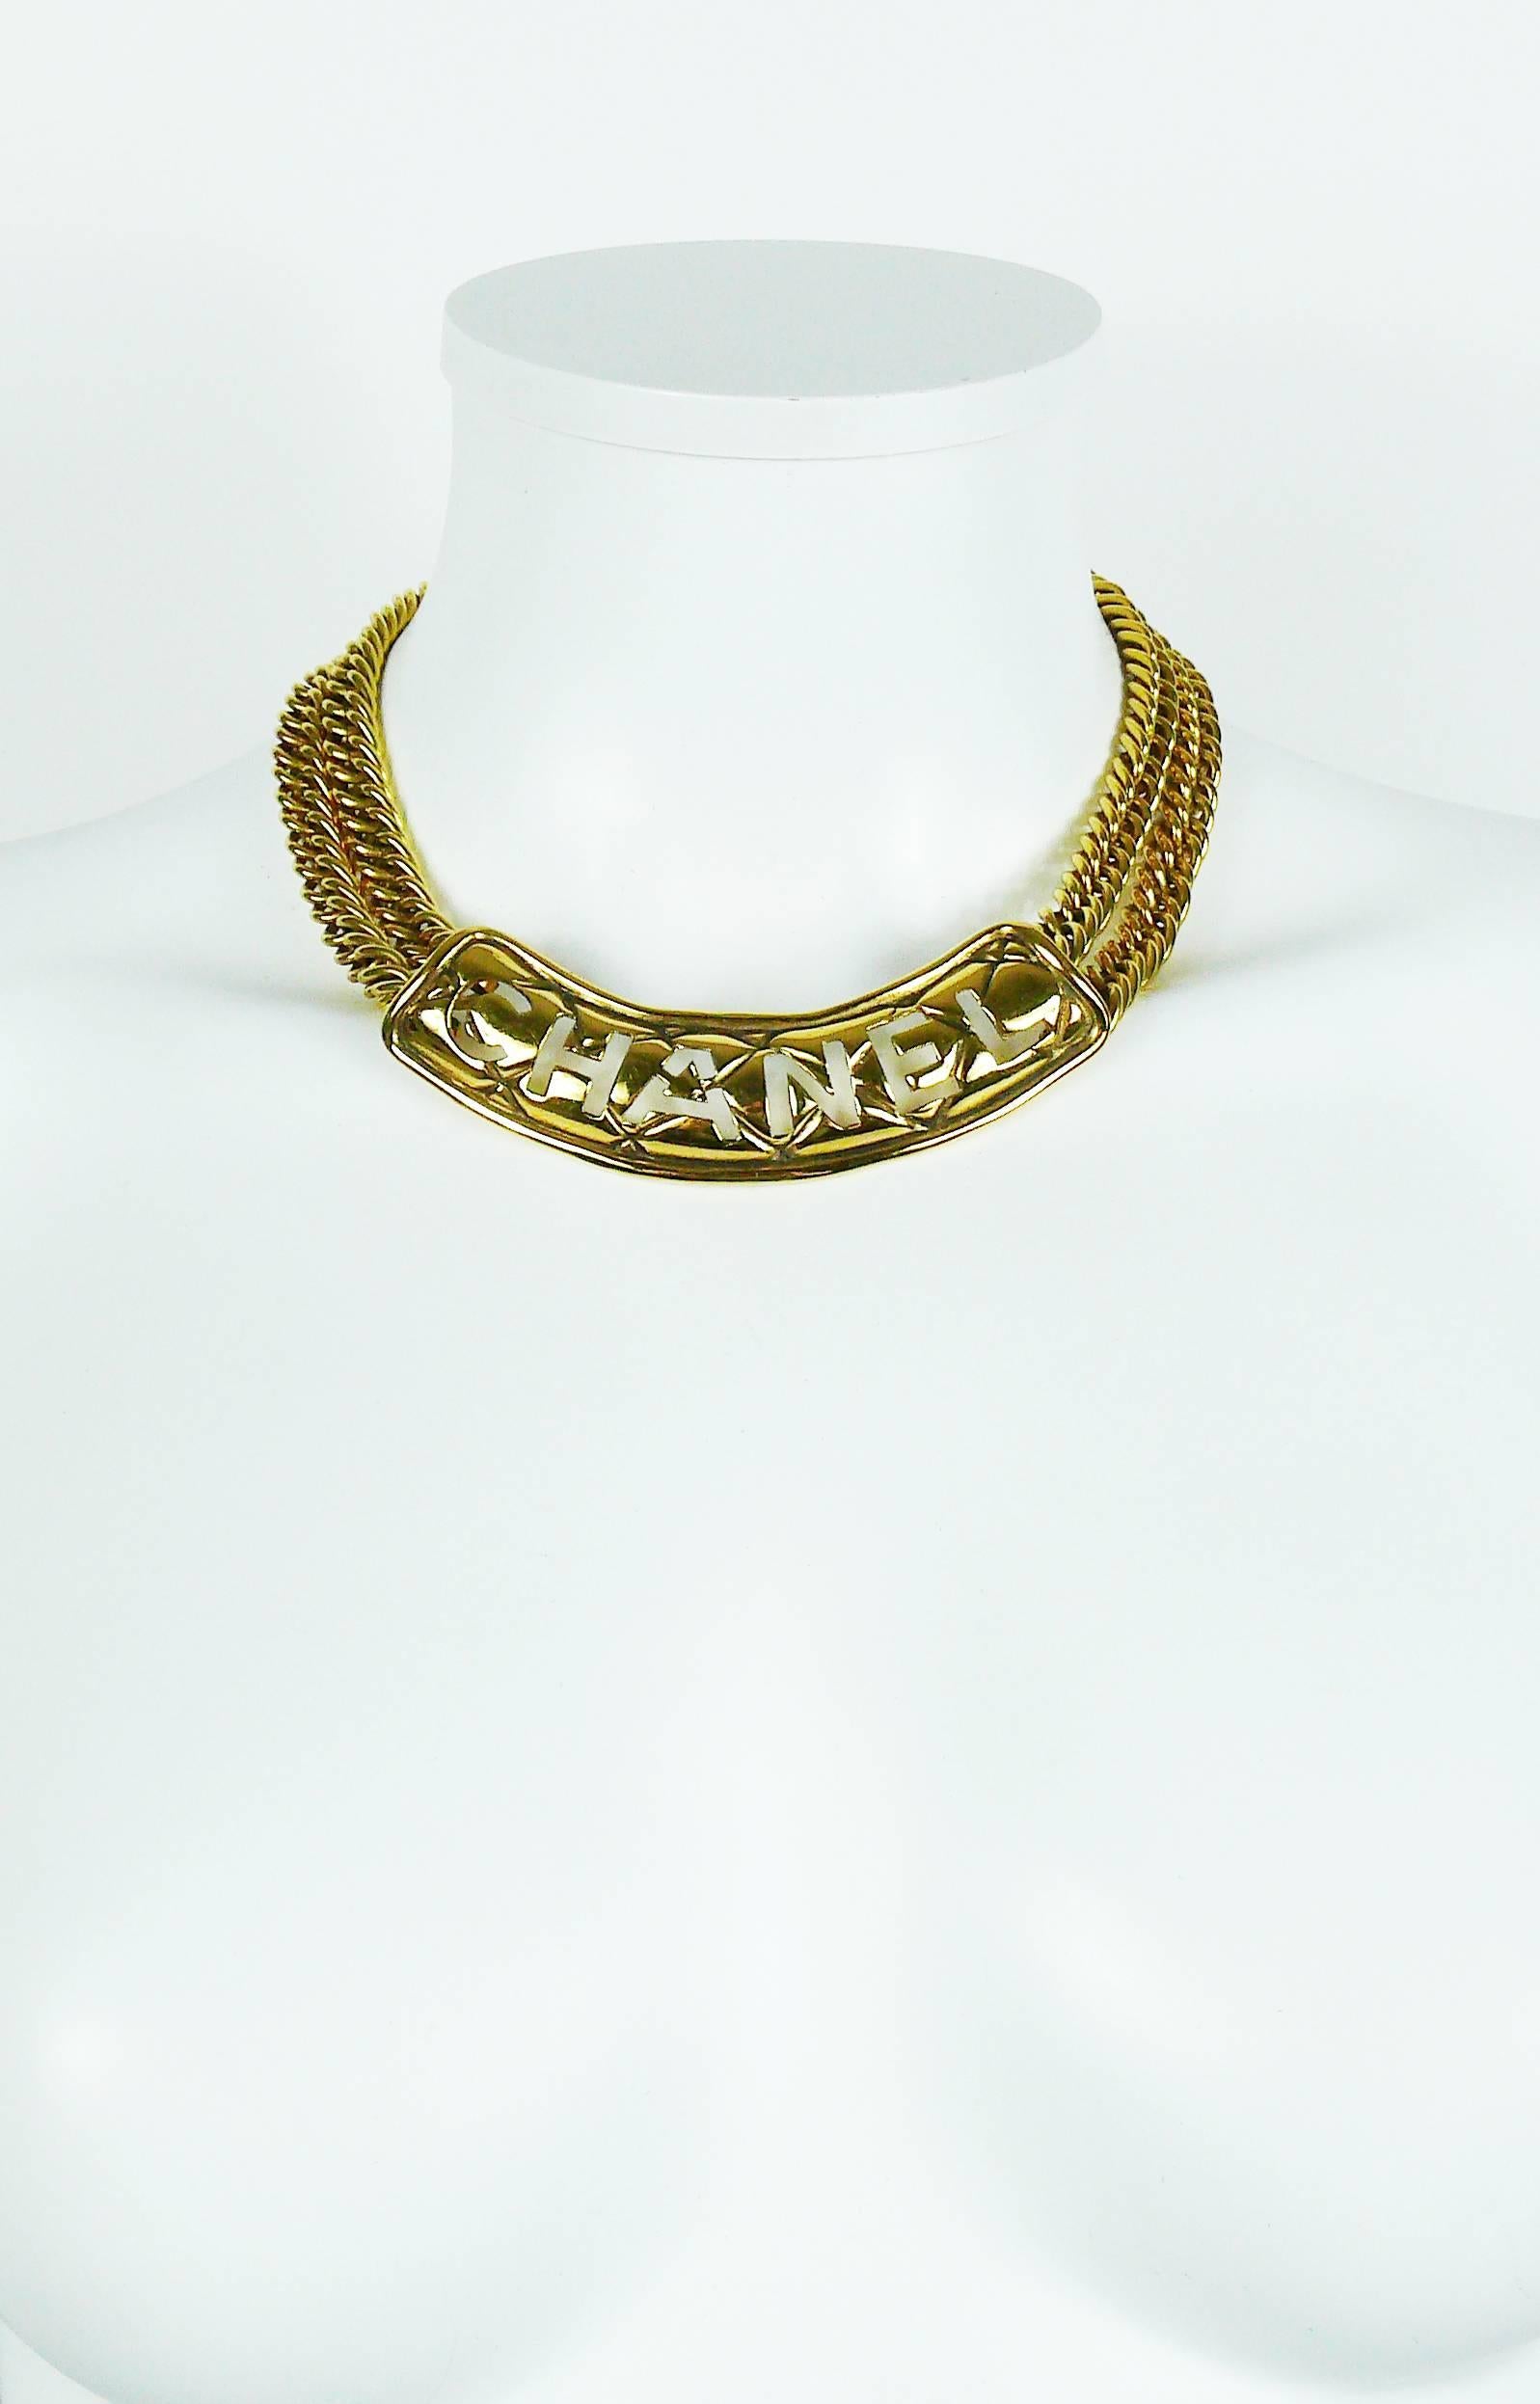 CHANEL vintage rare iconic gold toned choker necklace featuring a quilted cut out "C H A N E L" ID tag and a double chunky curb chain.

Spring clasp closure.

Marked CHANEL Made in France.
Numbered 3795.

Indicative measurements : length